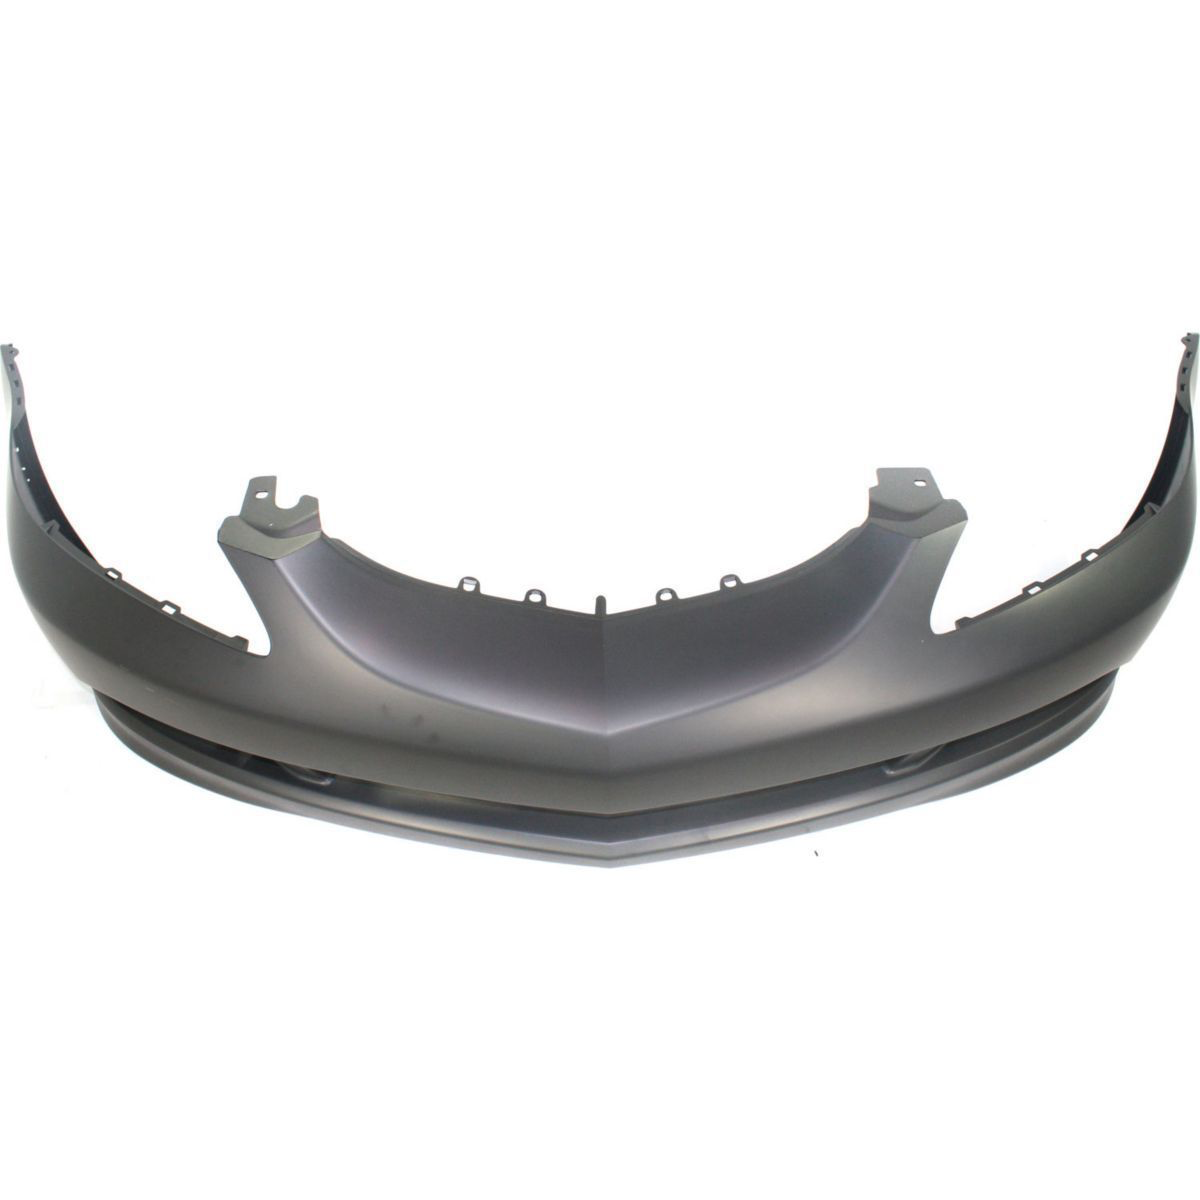 2005-2006 ACURA RSX FRONT Bumper Cover Painted to Match